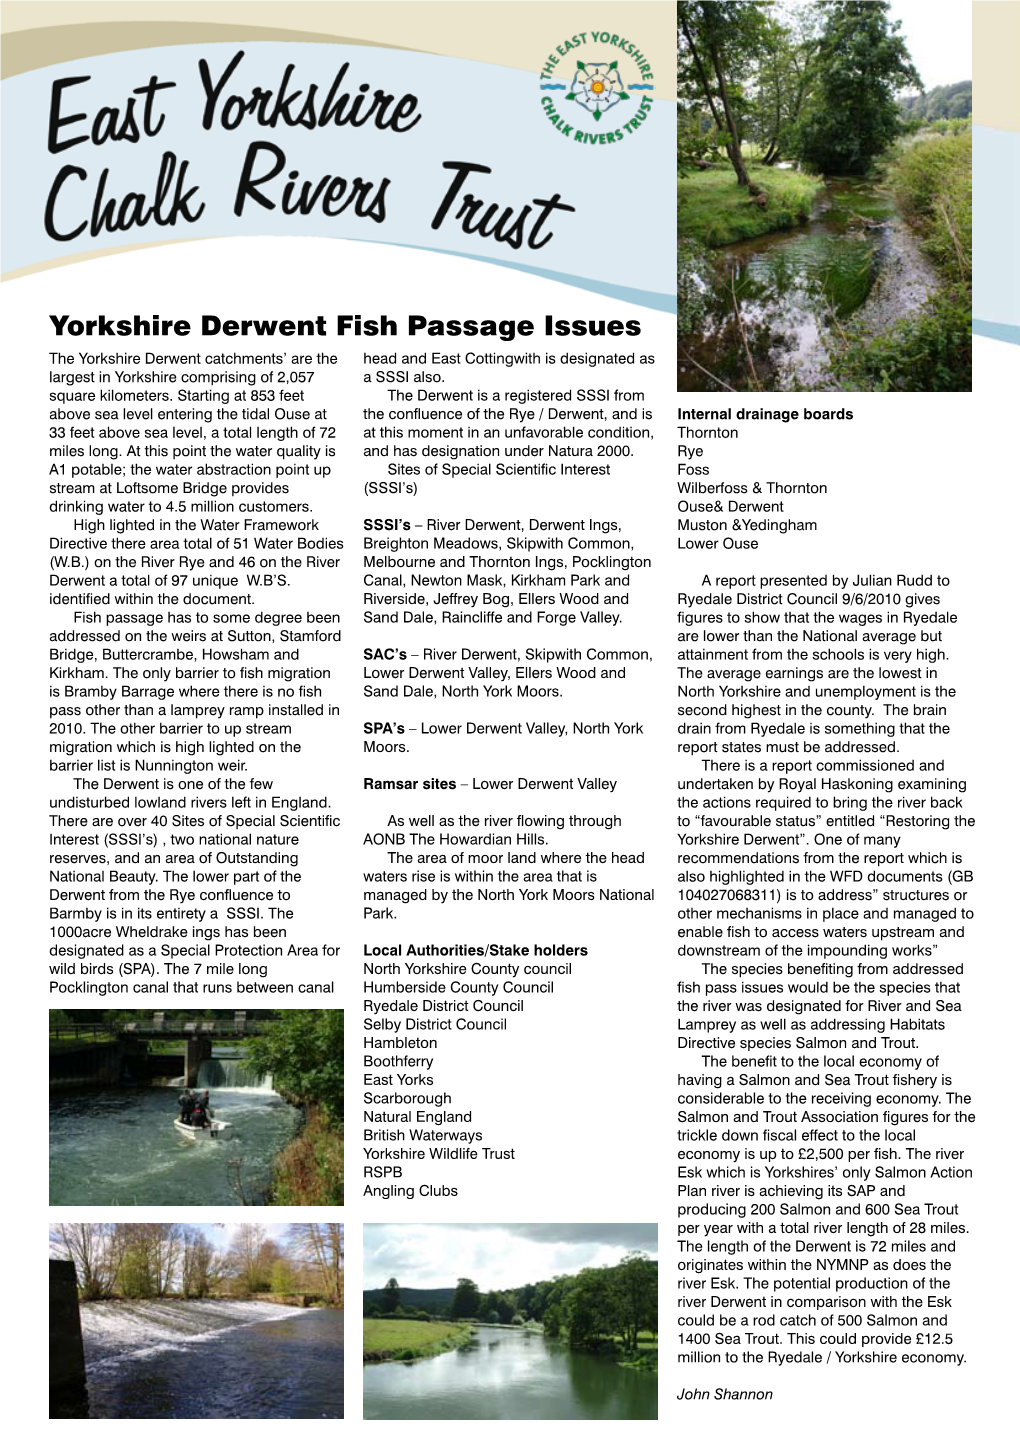 The River Derwent Fish Passage Issues